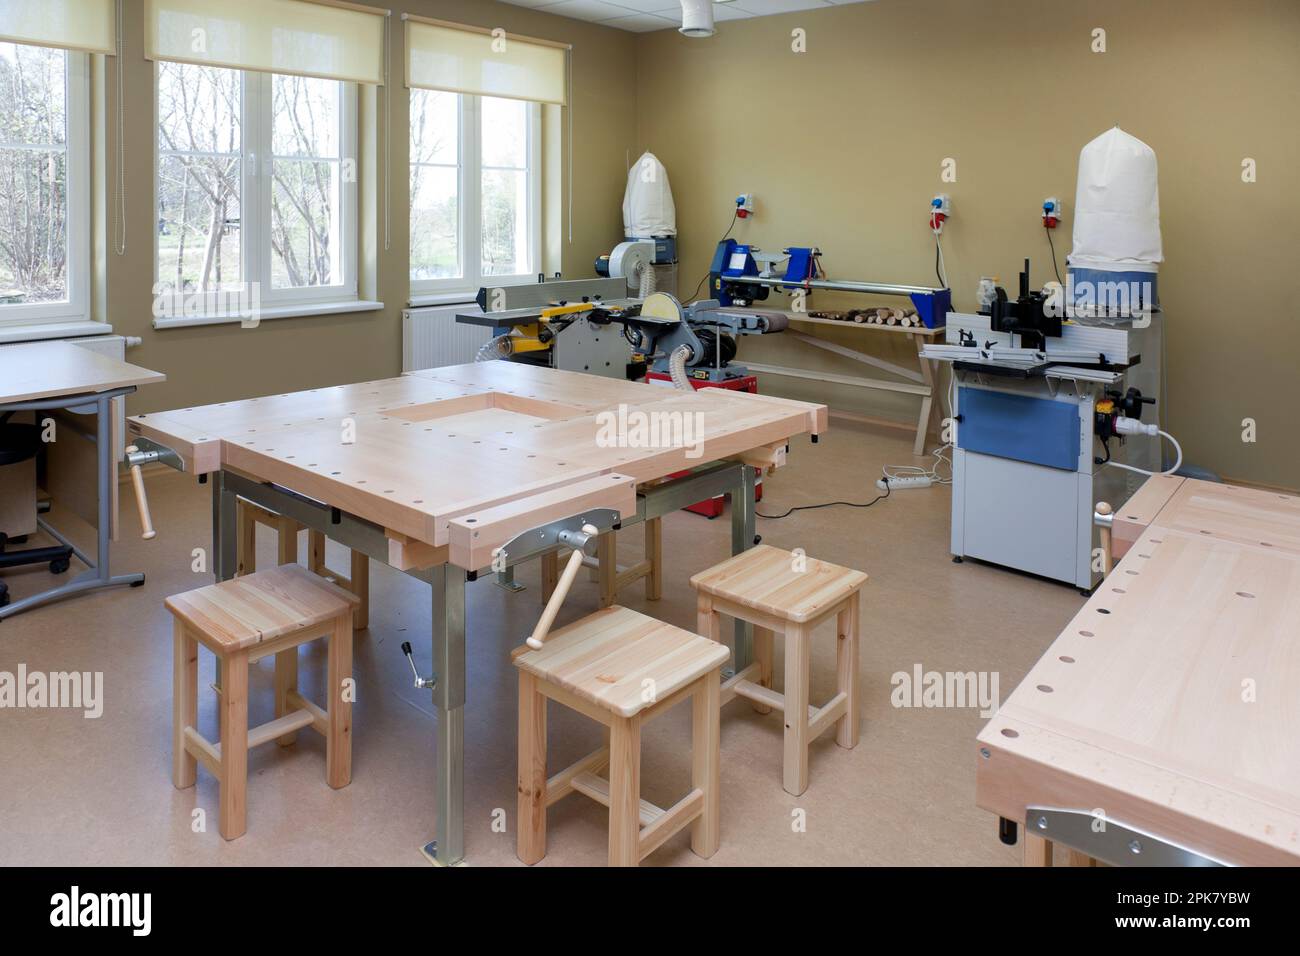 A school classroom with woodworking equipment, machinery and light engineering equipment, for vocational training. Stock Photo